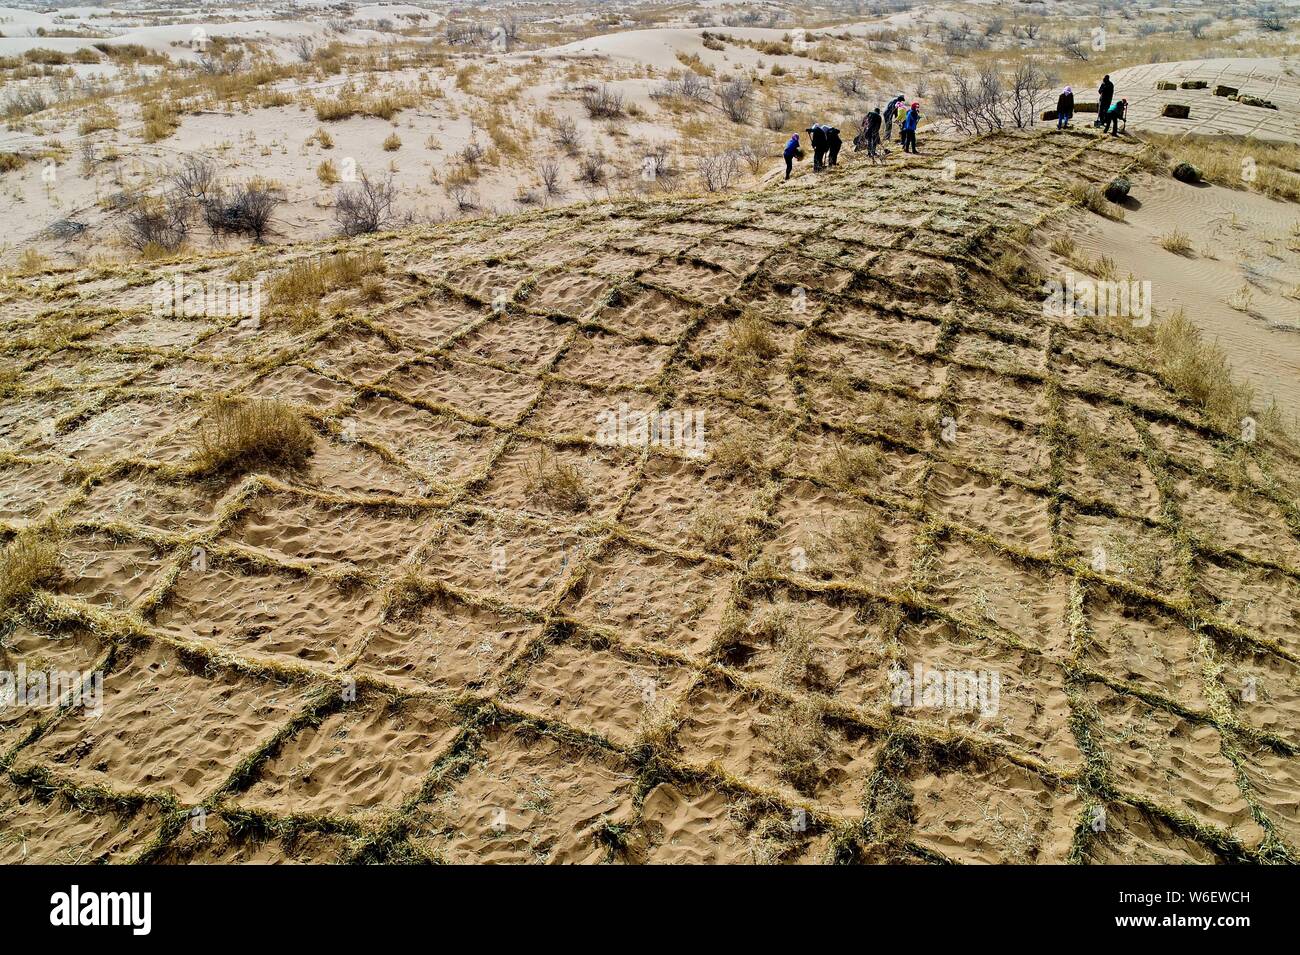 Anti-desertification volunteers strengthen a straw checkerboard sand barrier in Linze county of Zhangye city, northwest China's Gansu province, 27 Mar Stock Photo